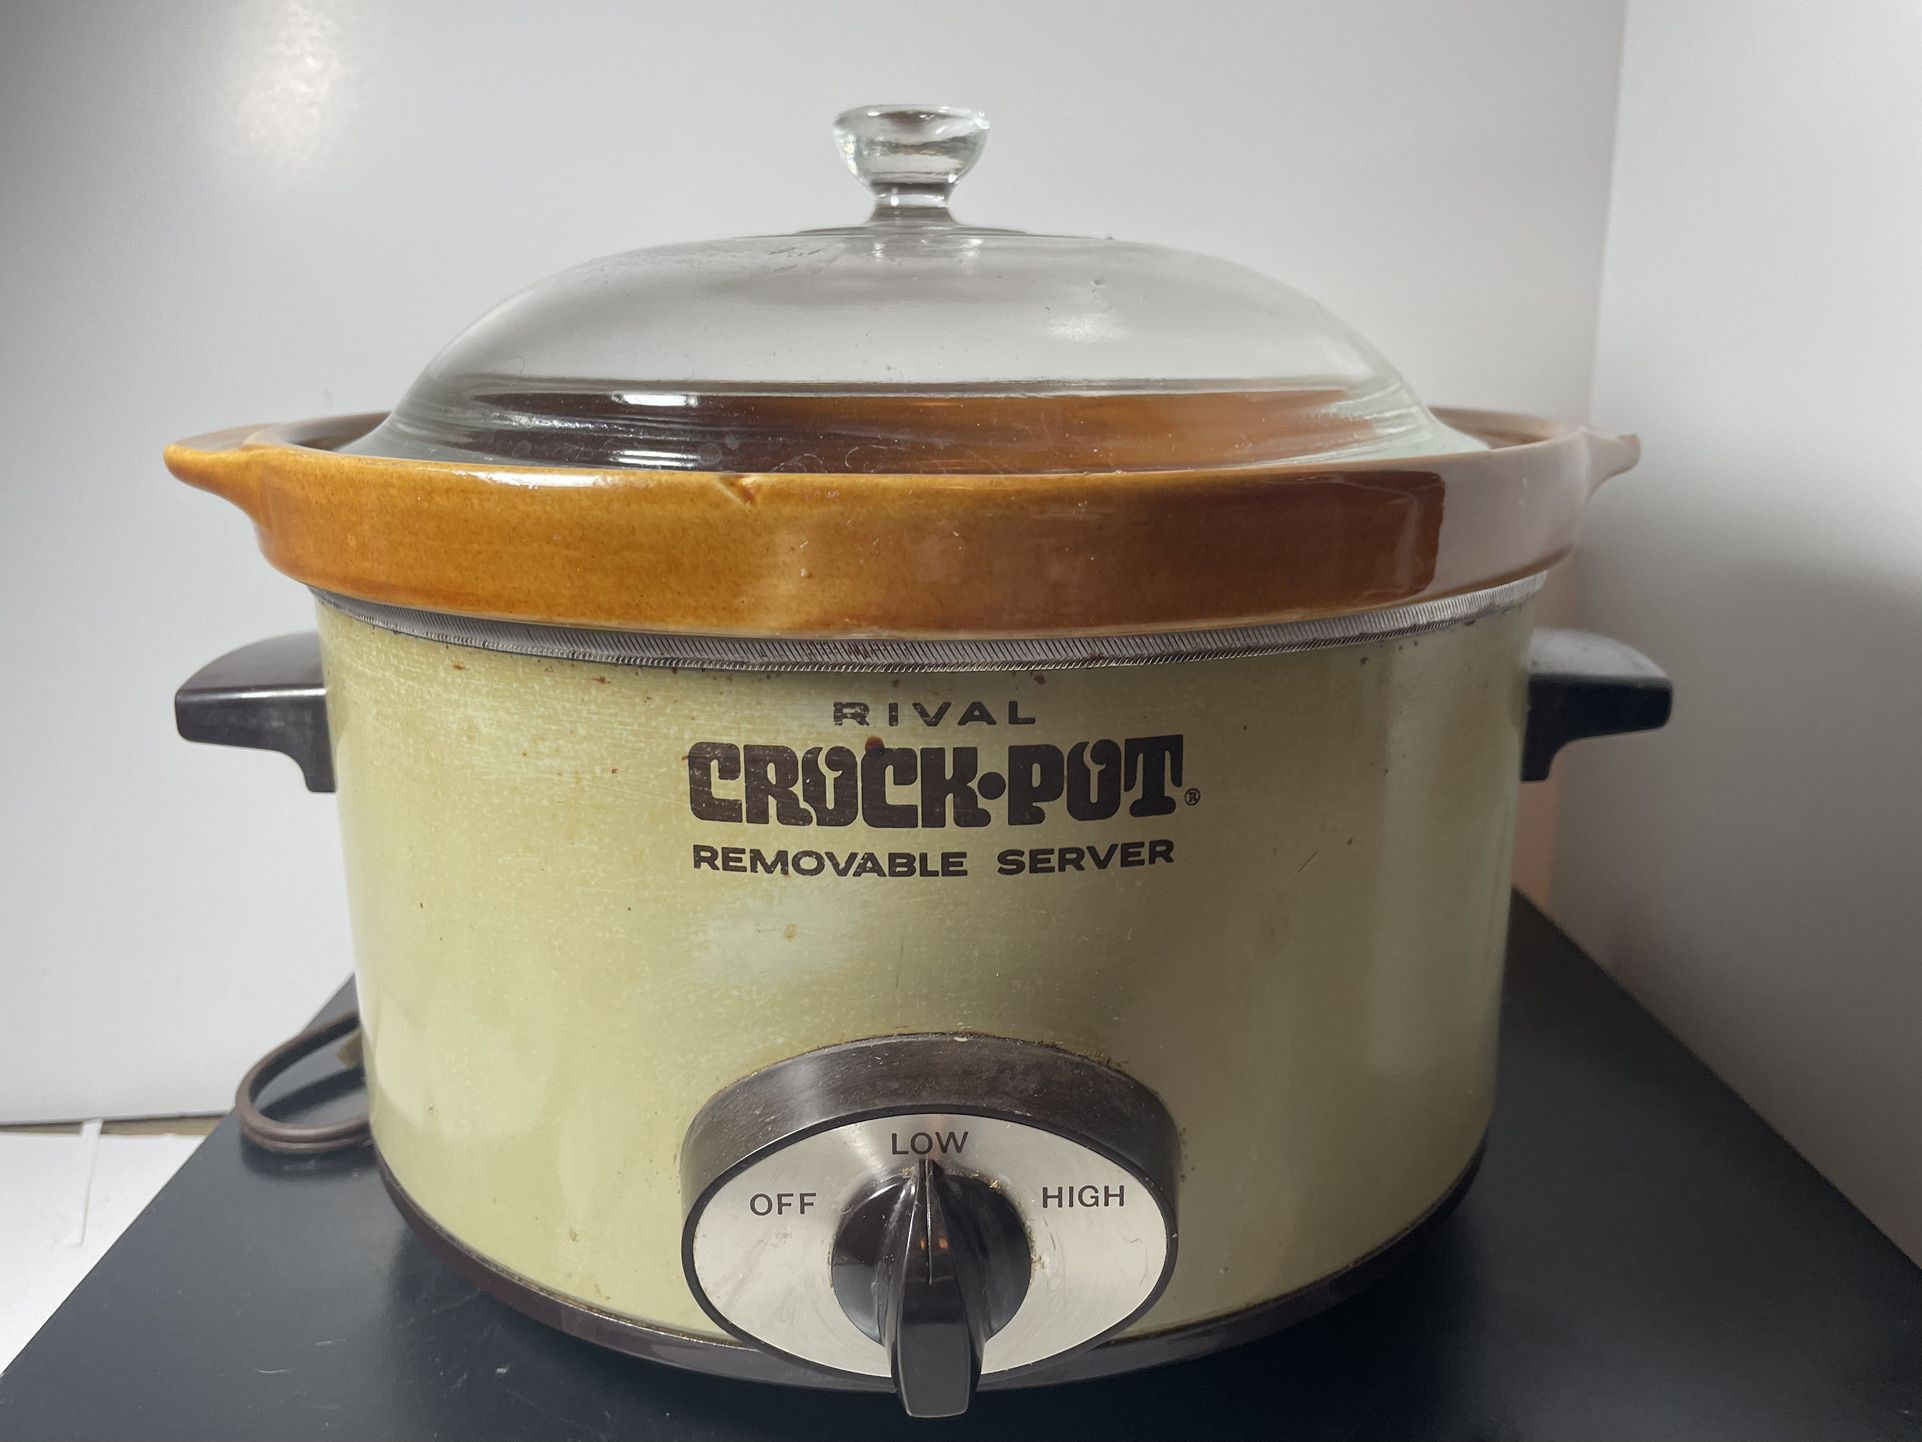 West Bend 4qt Slow Cooker for Sale in Willoughby Hills, OH - OfferUp